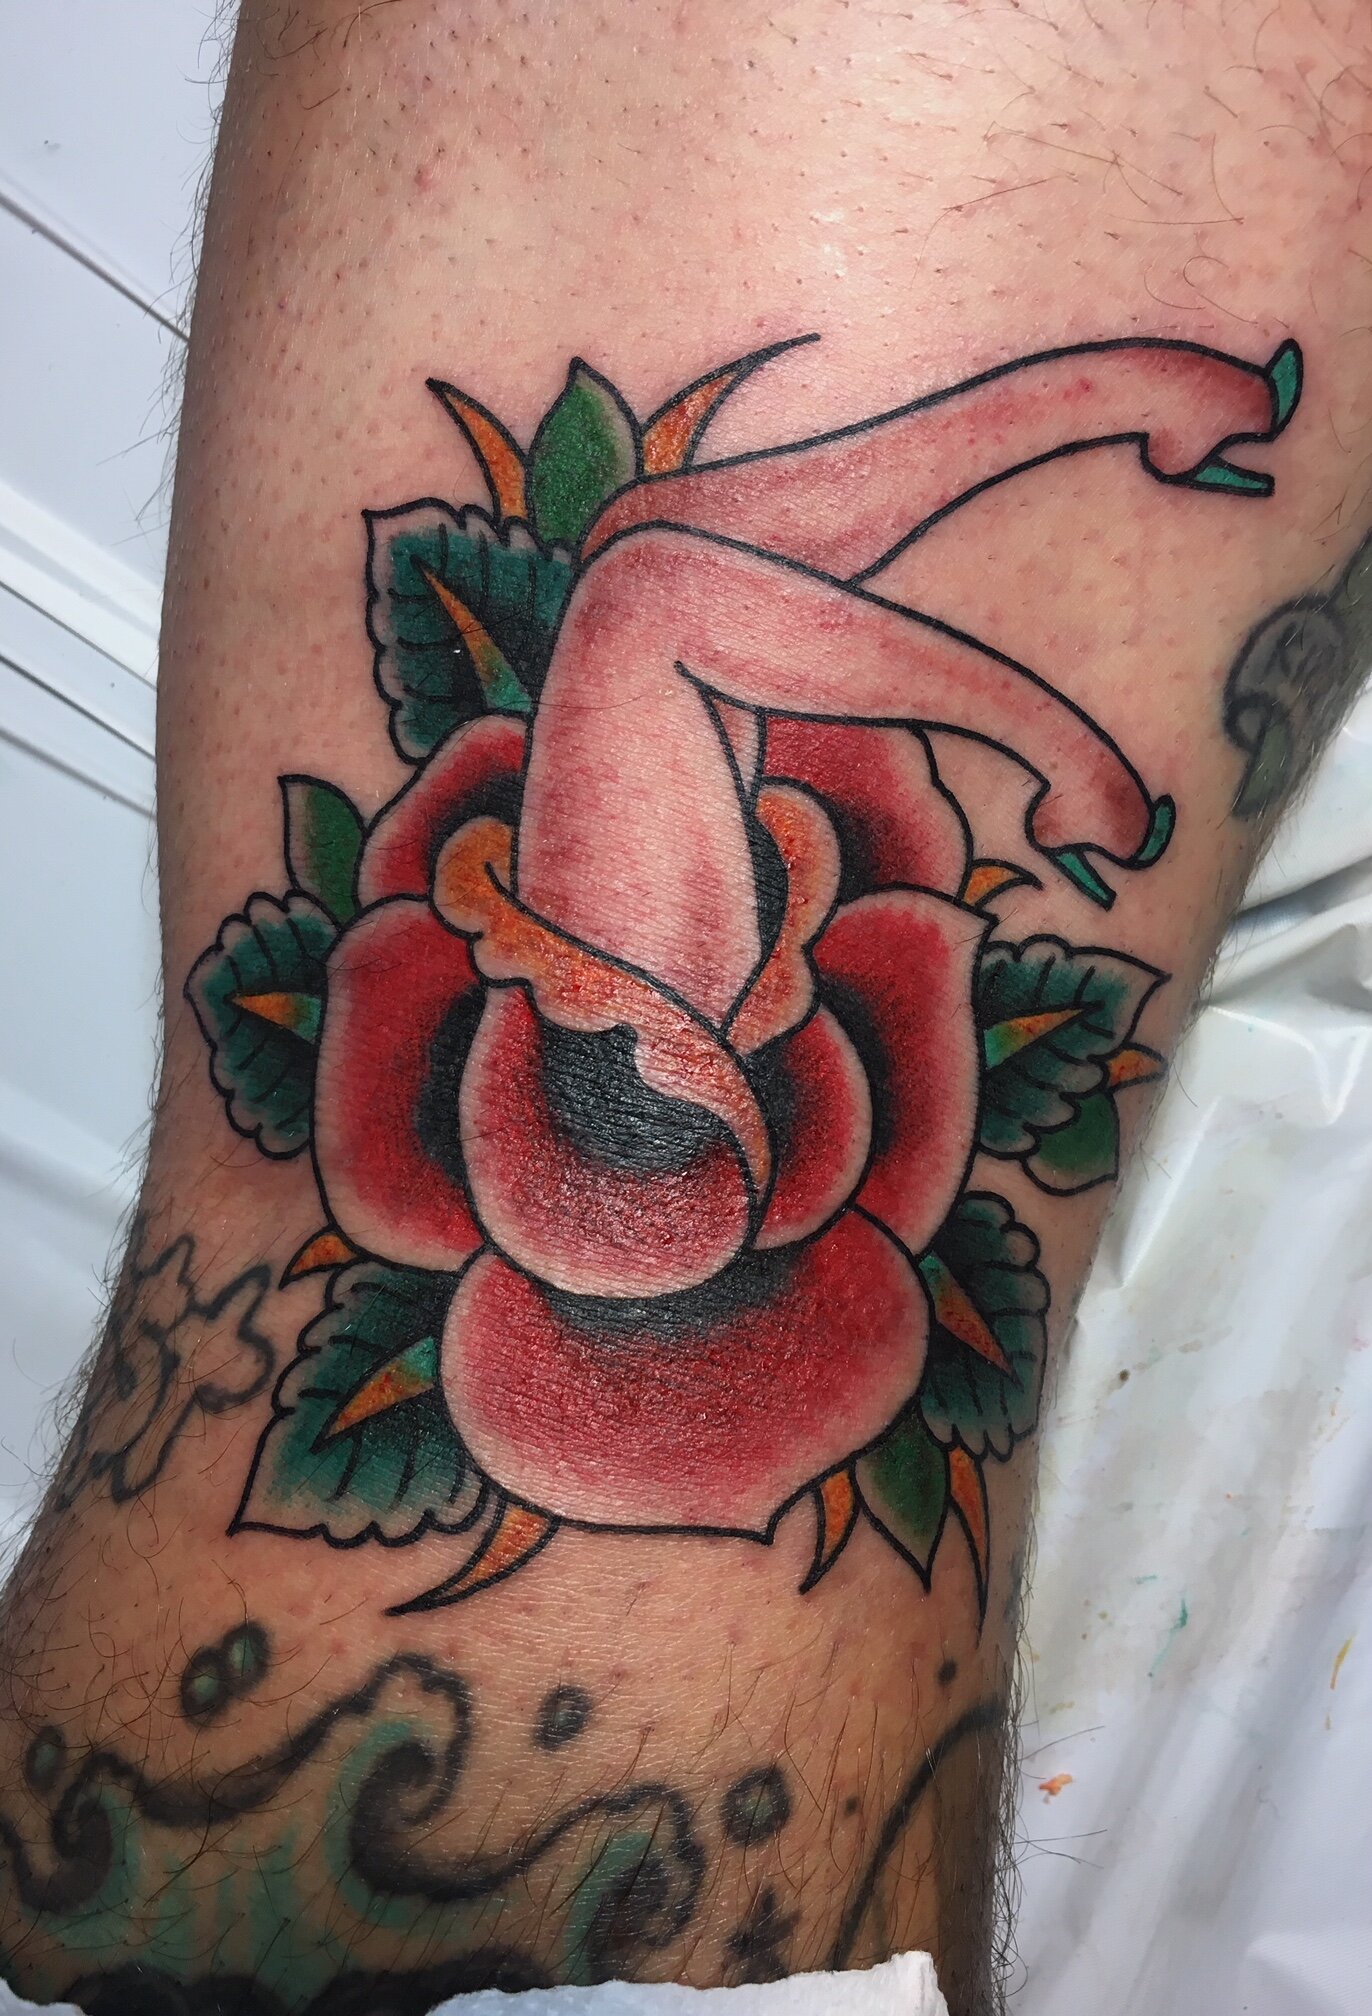 Traditional rose tattoo with pin up girl in color by Brian Gattis at Southern Star Tattoo in Atlanta, Georgia